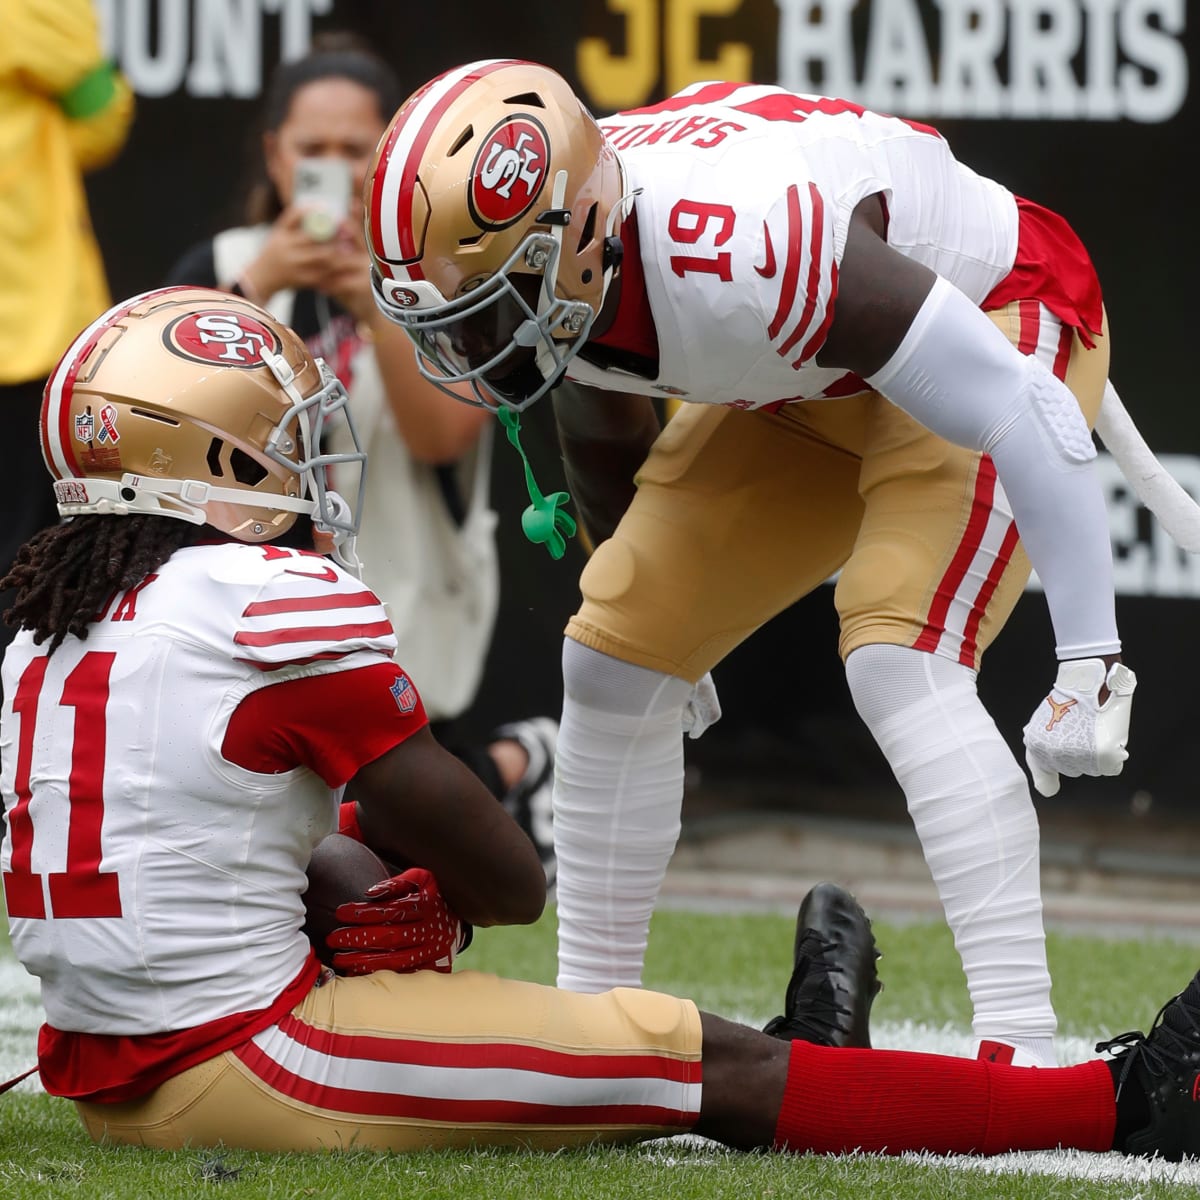 Power Rankings: 49ers Remain the No. 1 Team Heading into the